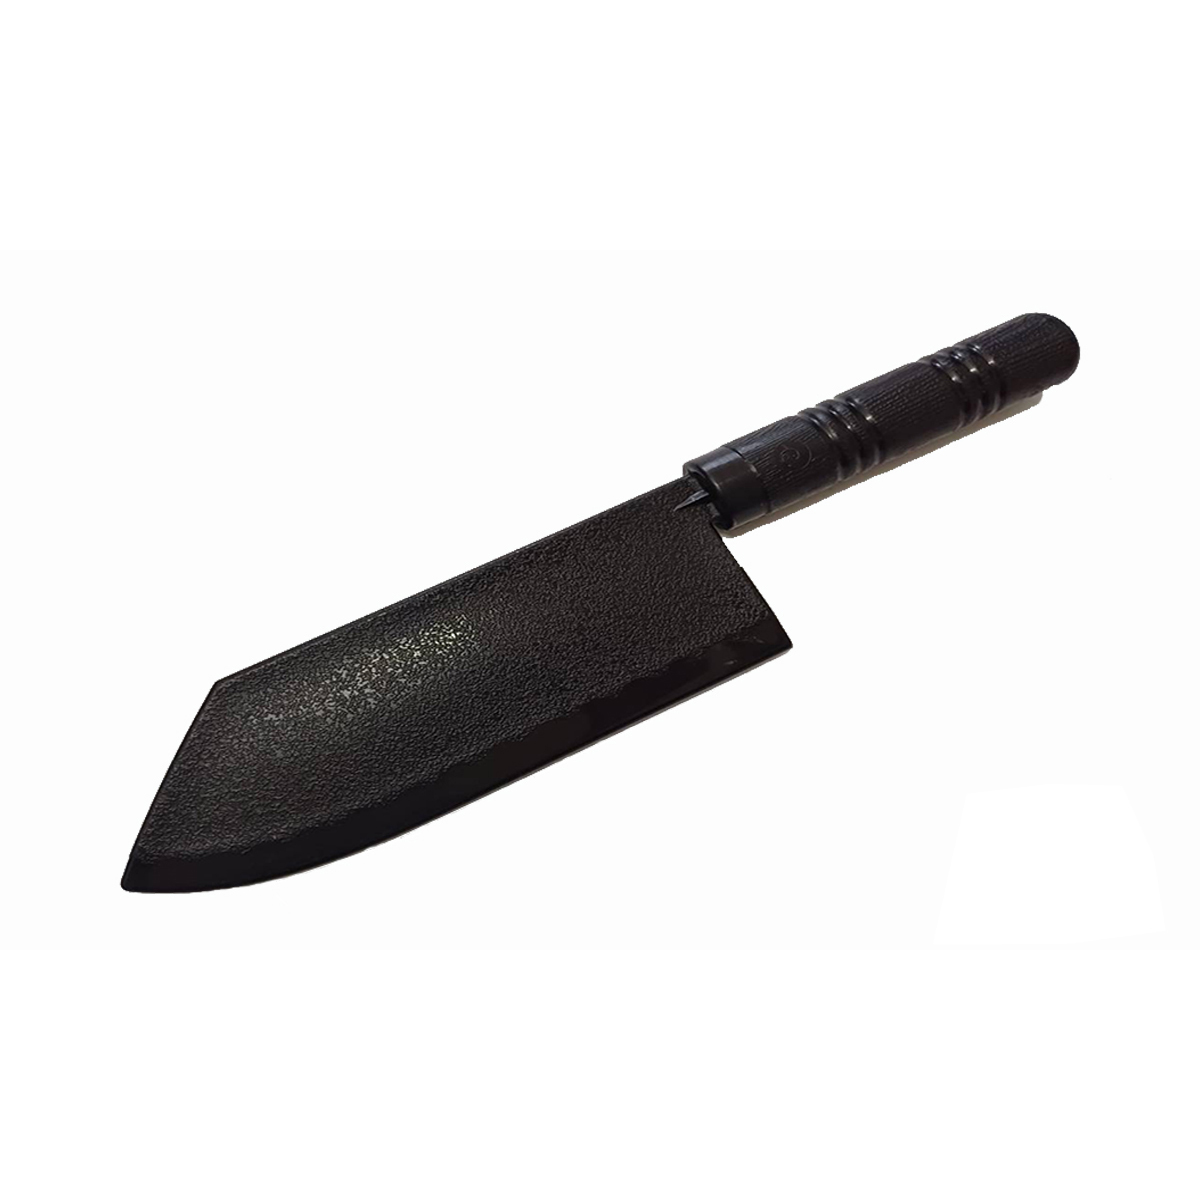 Black TPR Rubber Kitchen Meat Cleaver Knife V2 - 12.6" - PRE ORD - Click Image to Close